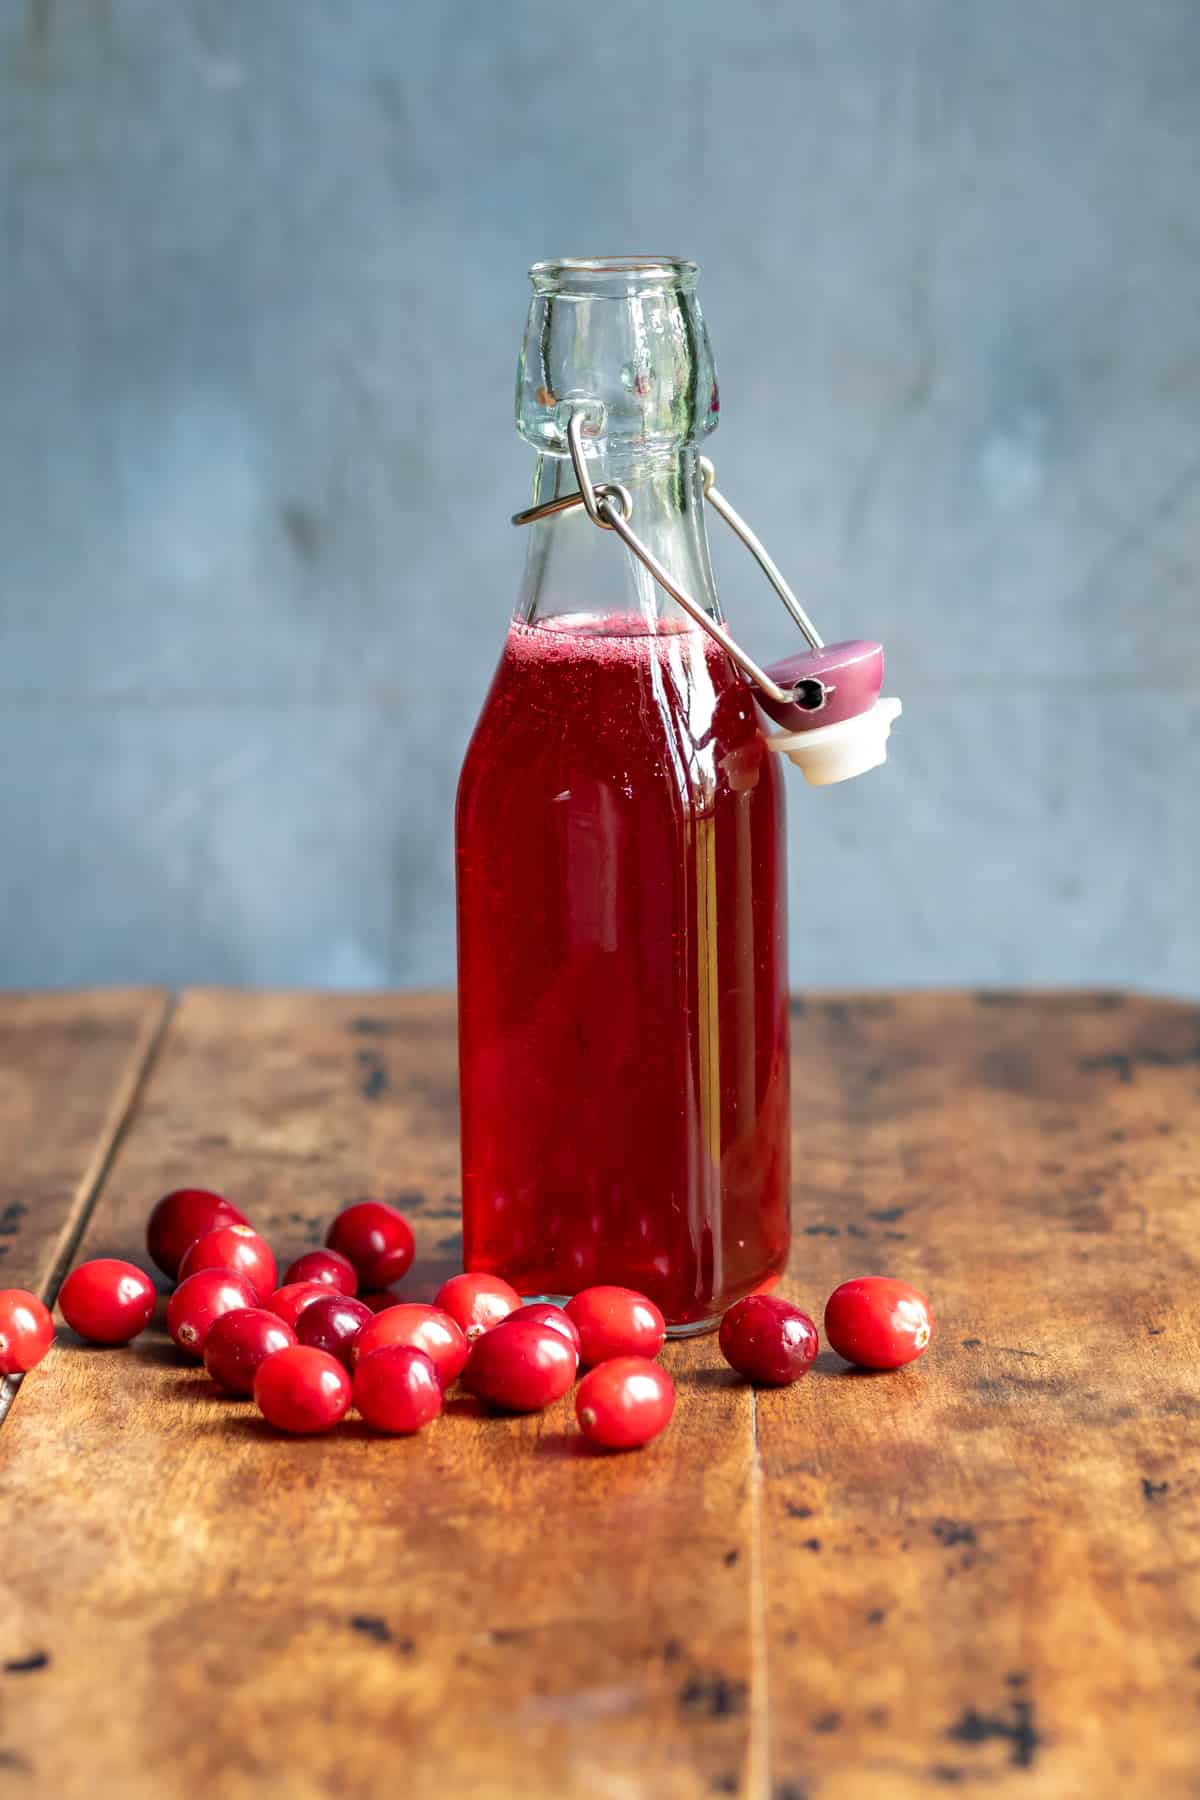 Bottle of cranberry syrup on a wooden table next to fresh cranberries.